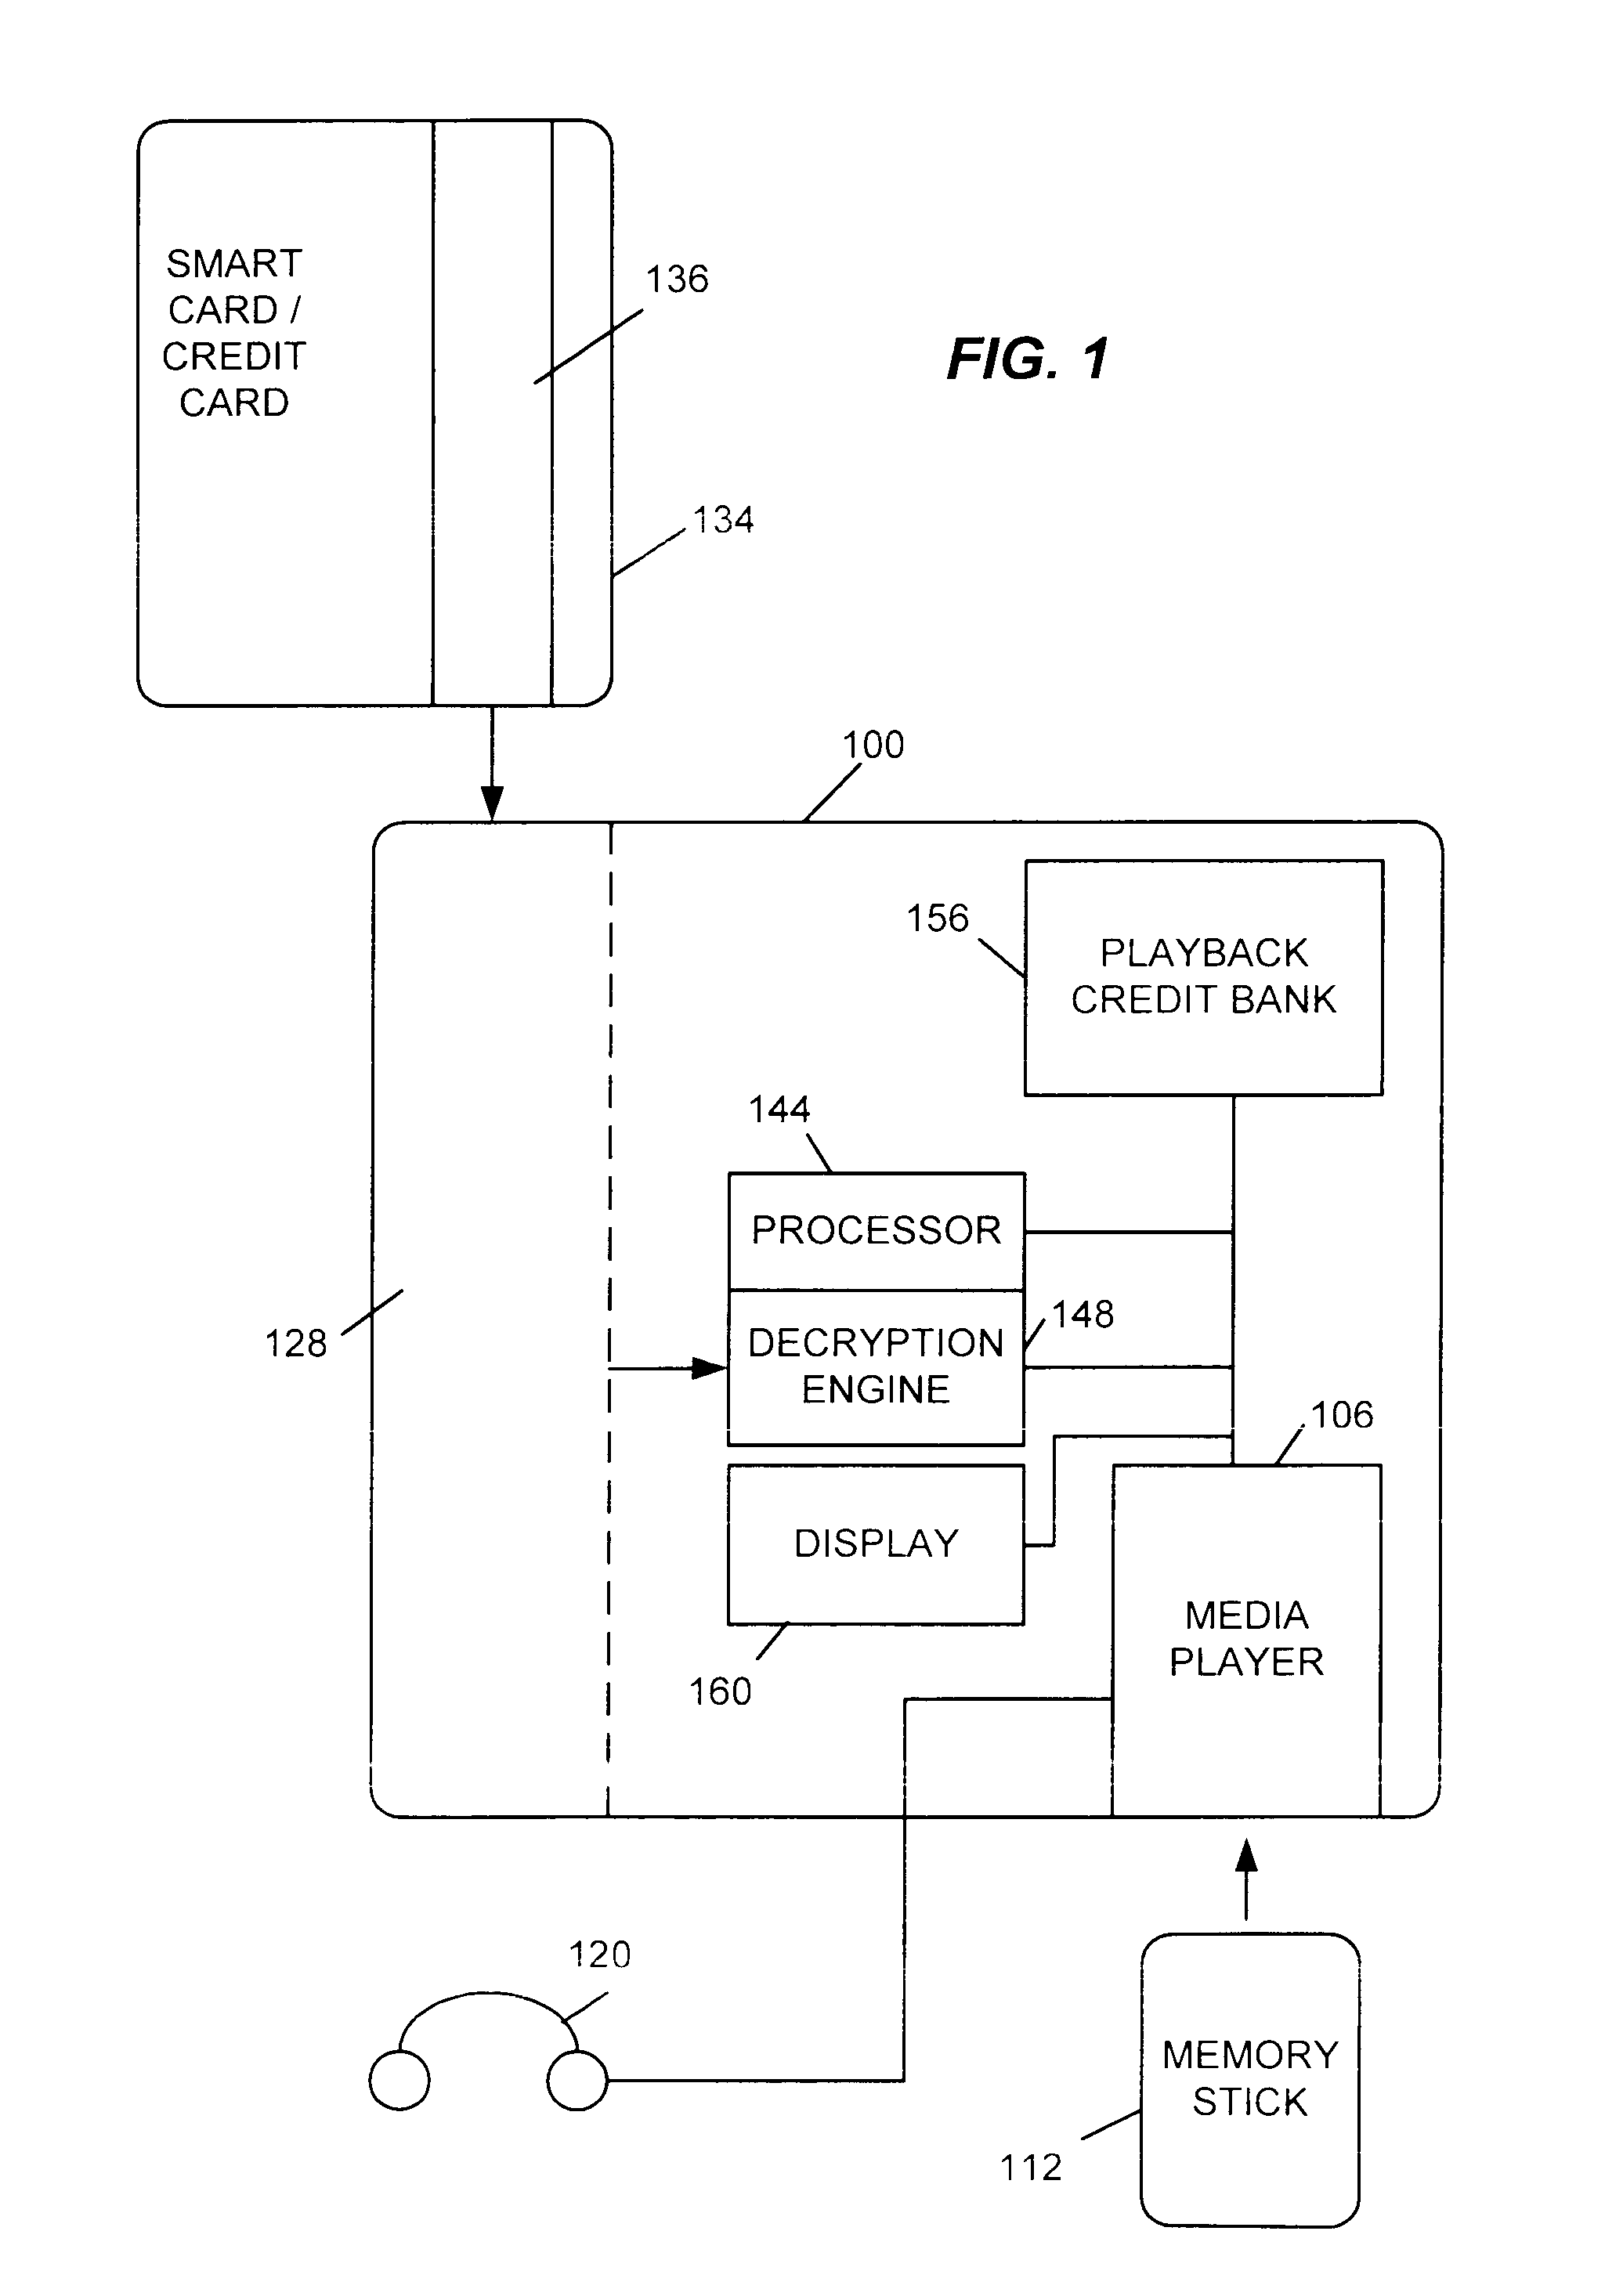 Portable music player with pay per play usage and method for purchase of credits for usage